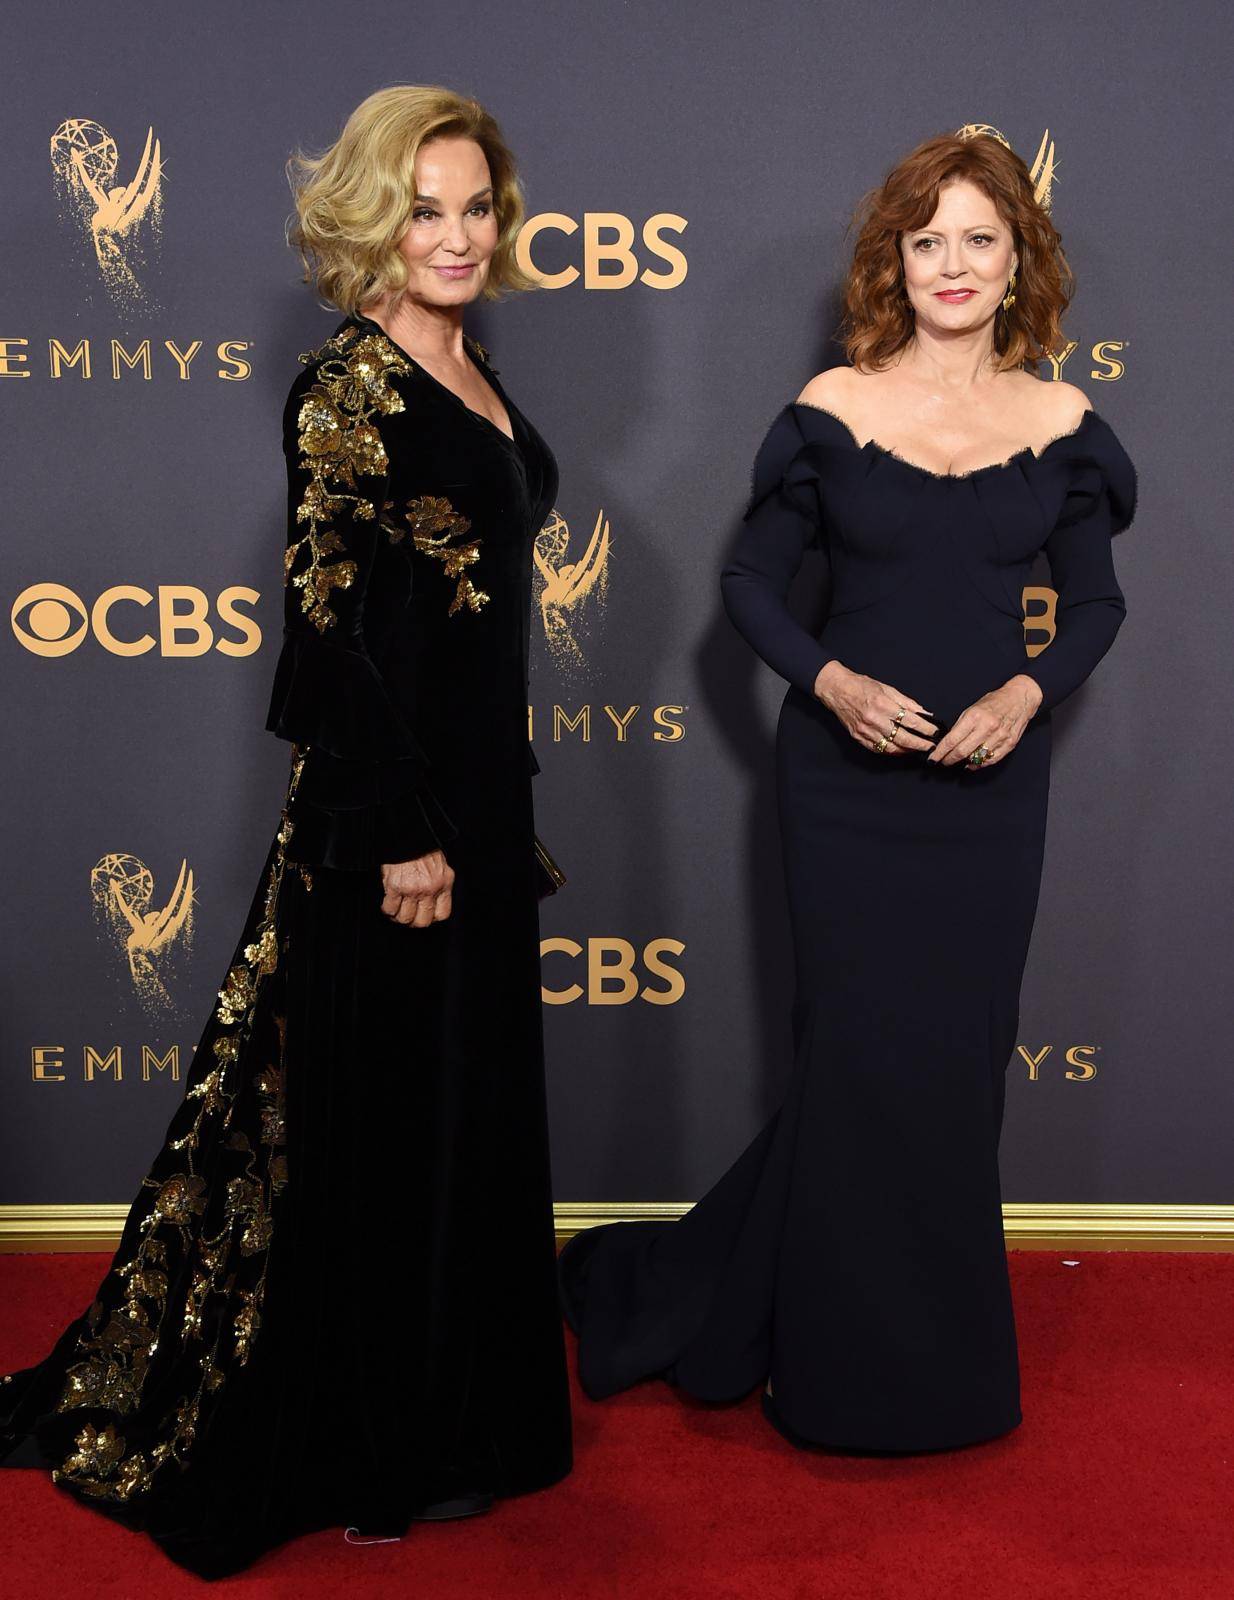 The 69th Emmy Awards - Arrivals